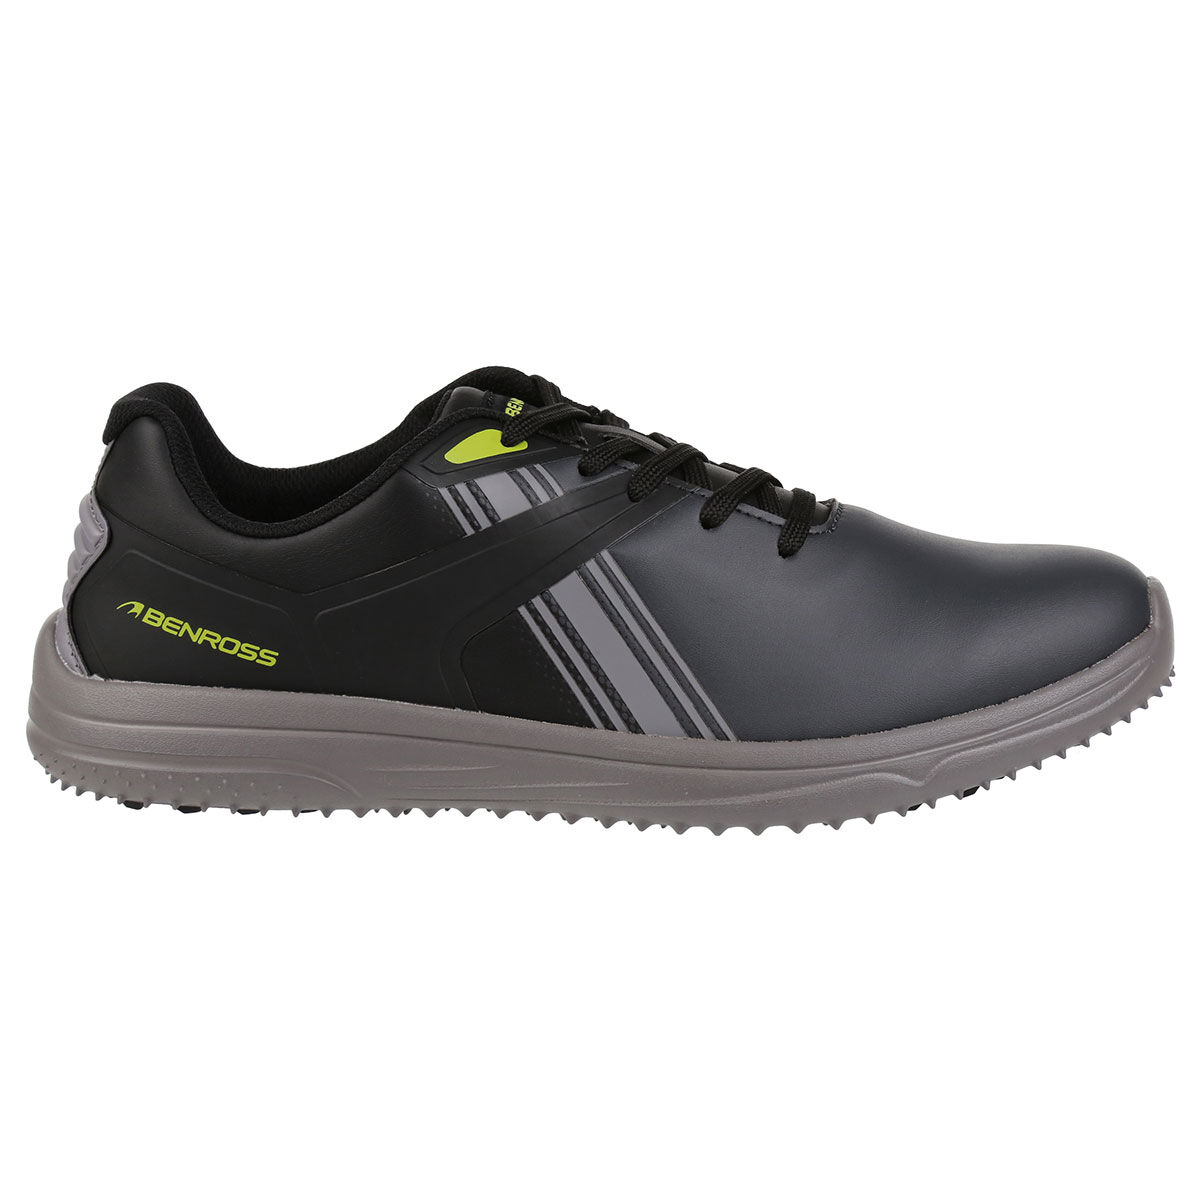 Benross Black, Grey and Yellow Stylish Colour Block Dynamo Waterproof Spikeless Golf Shoes, Size: 8 | American Golf